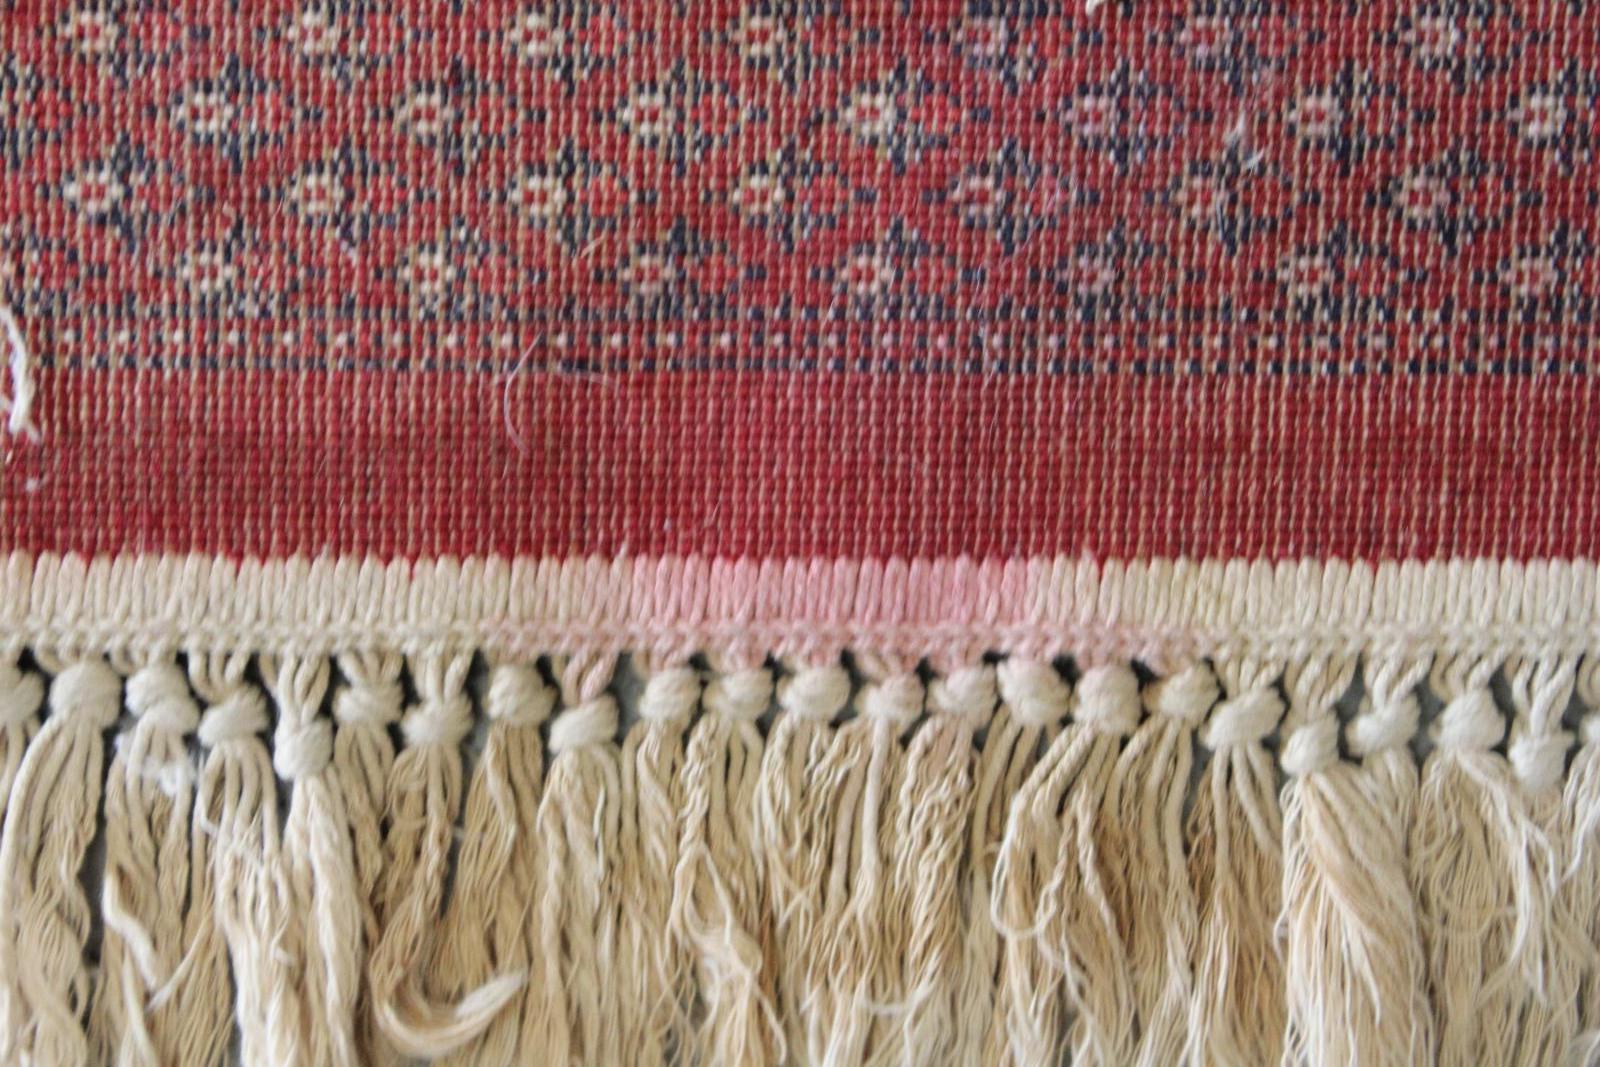 Rug Cleaning Misconceptions. Rug Cleaning in Prescott, AZ